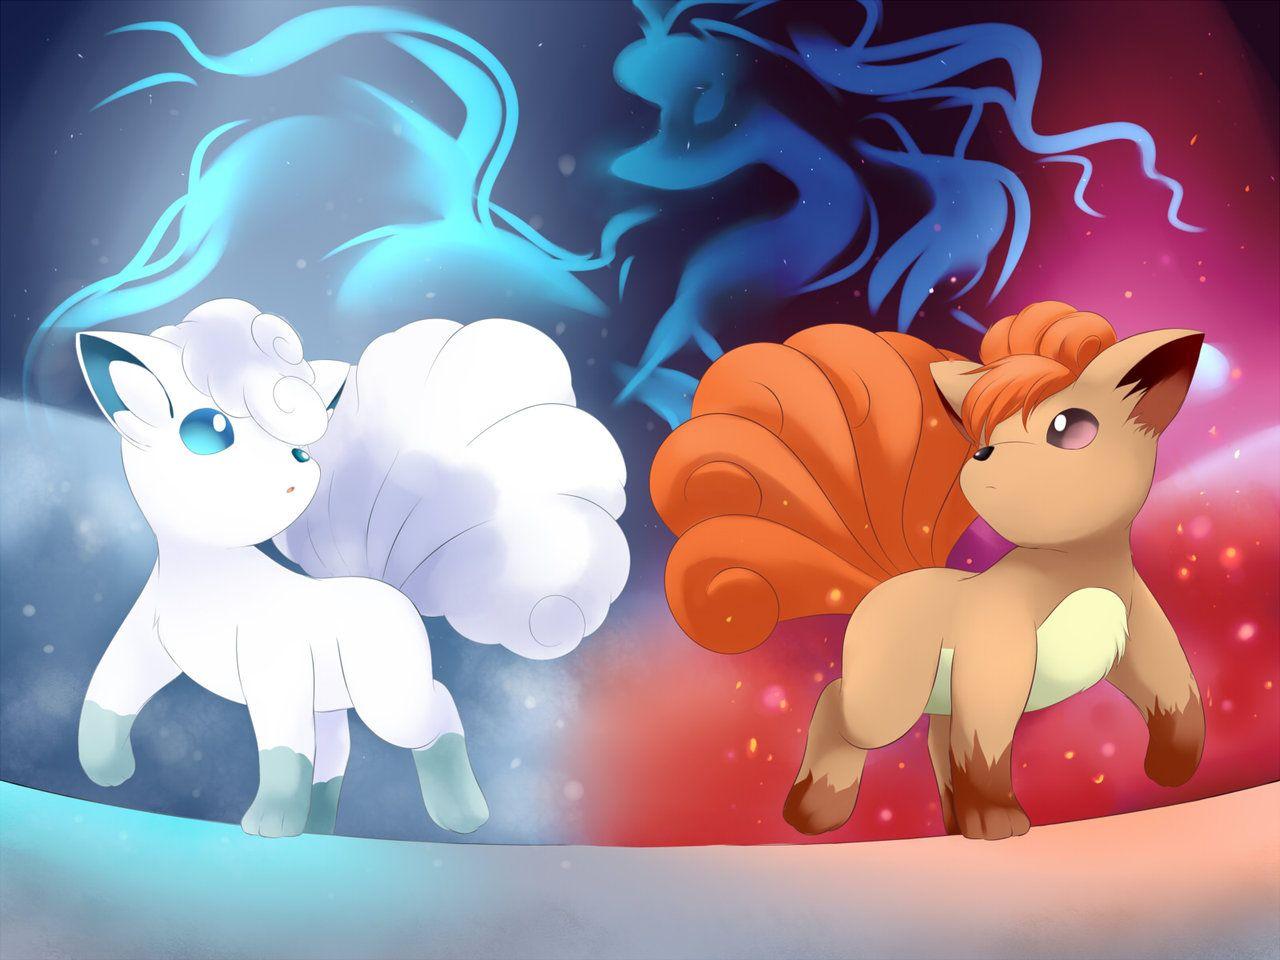 When Fire meets Ice: The path of Vulpix